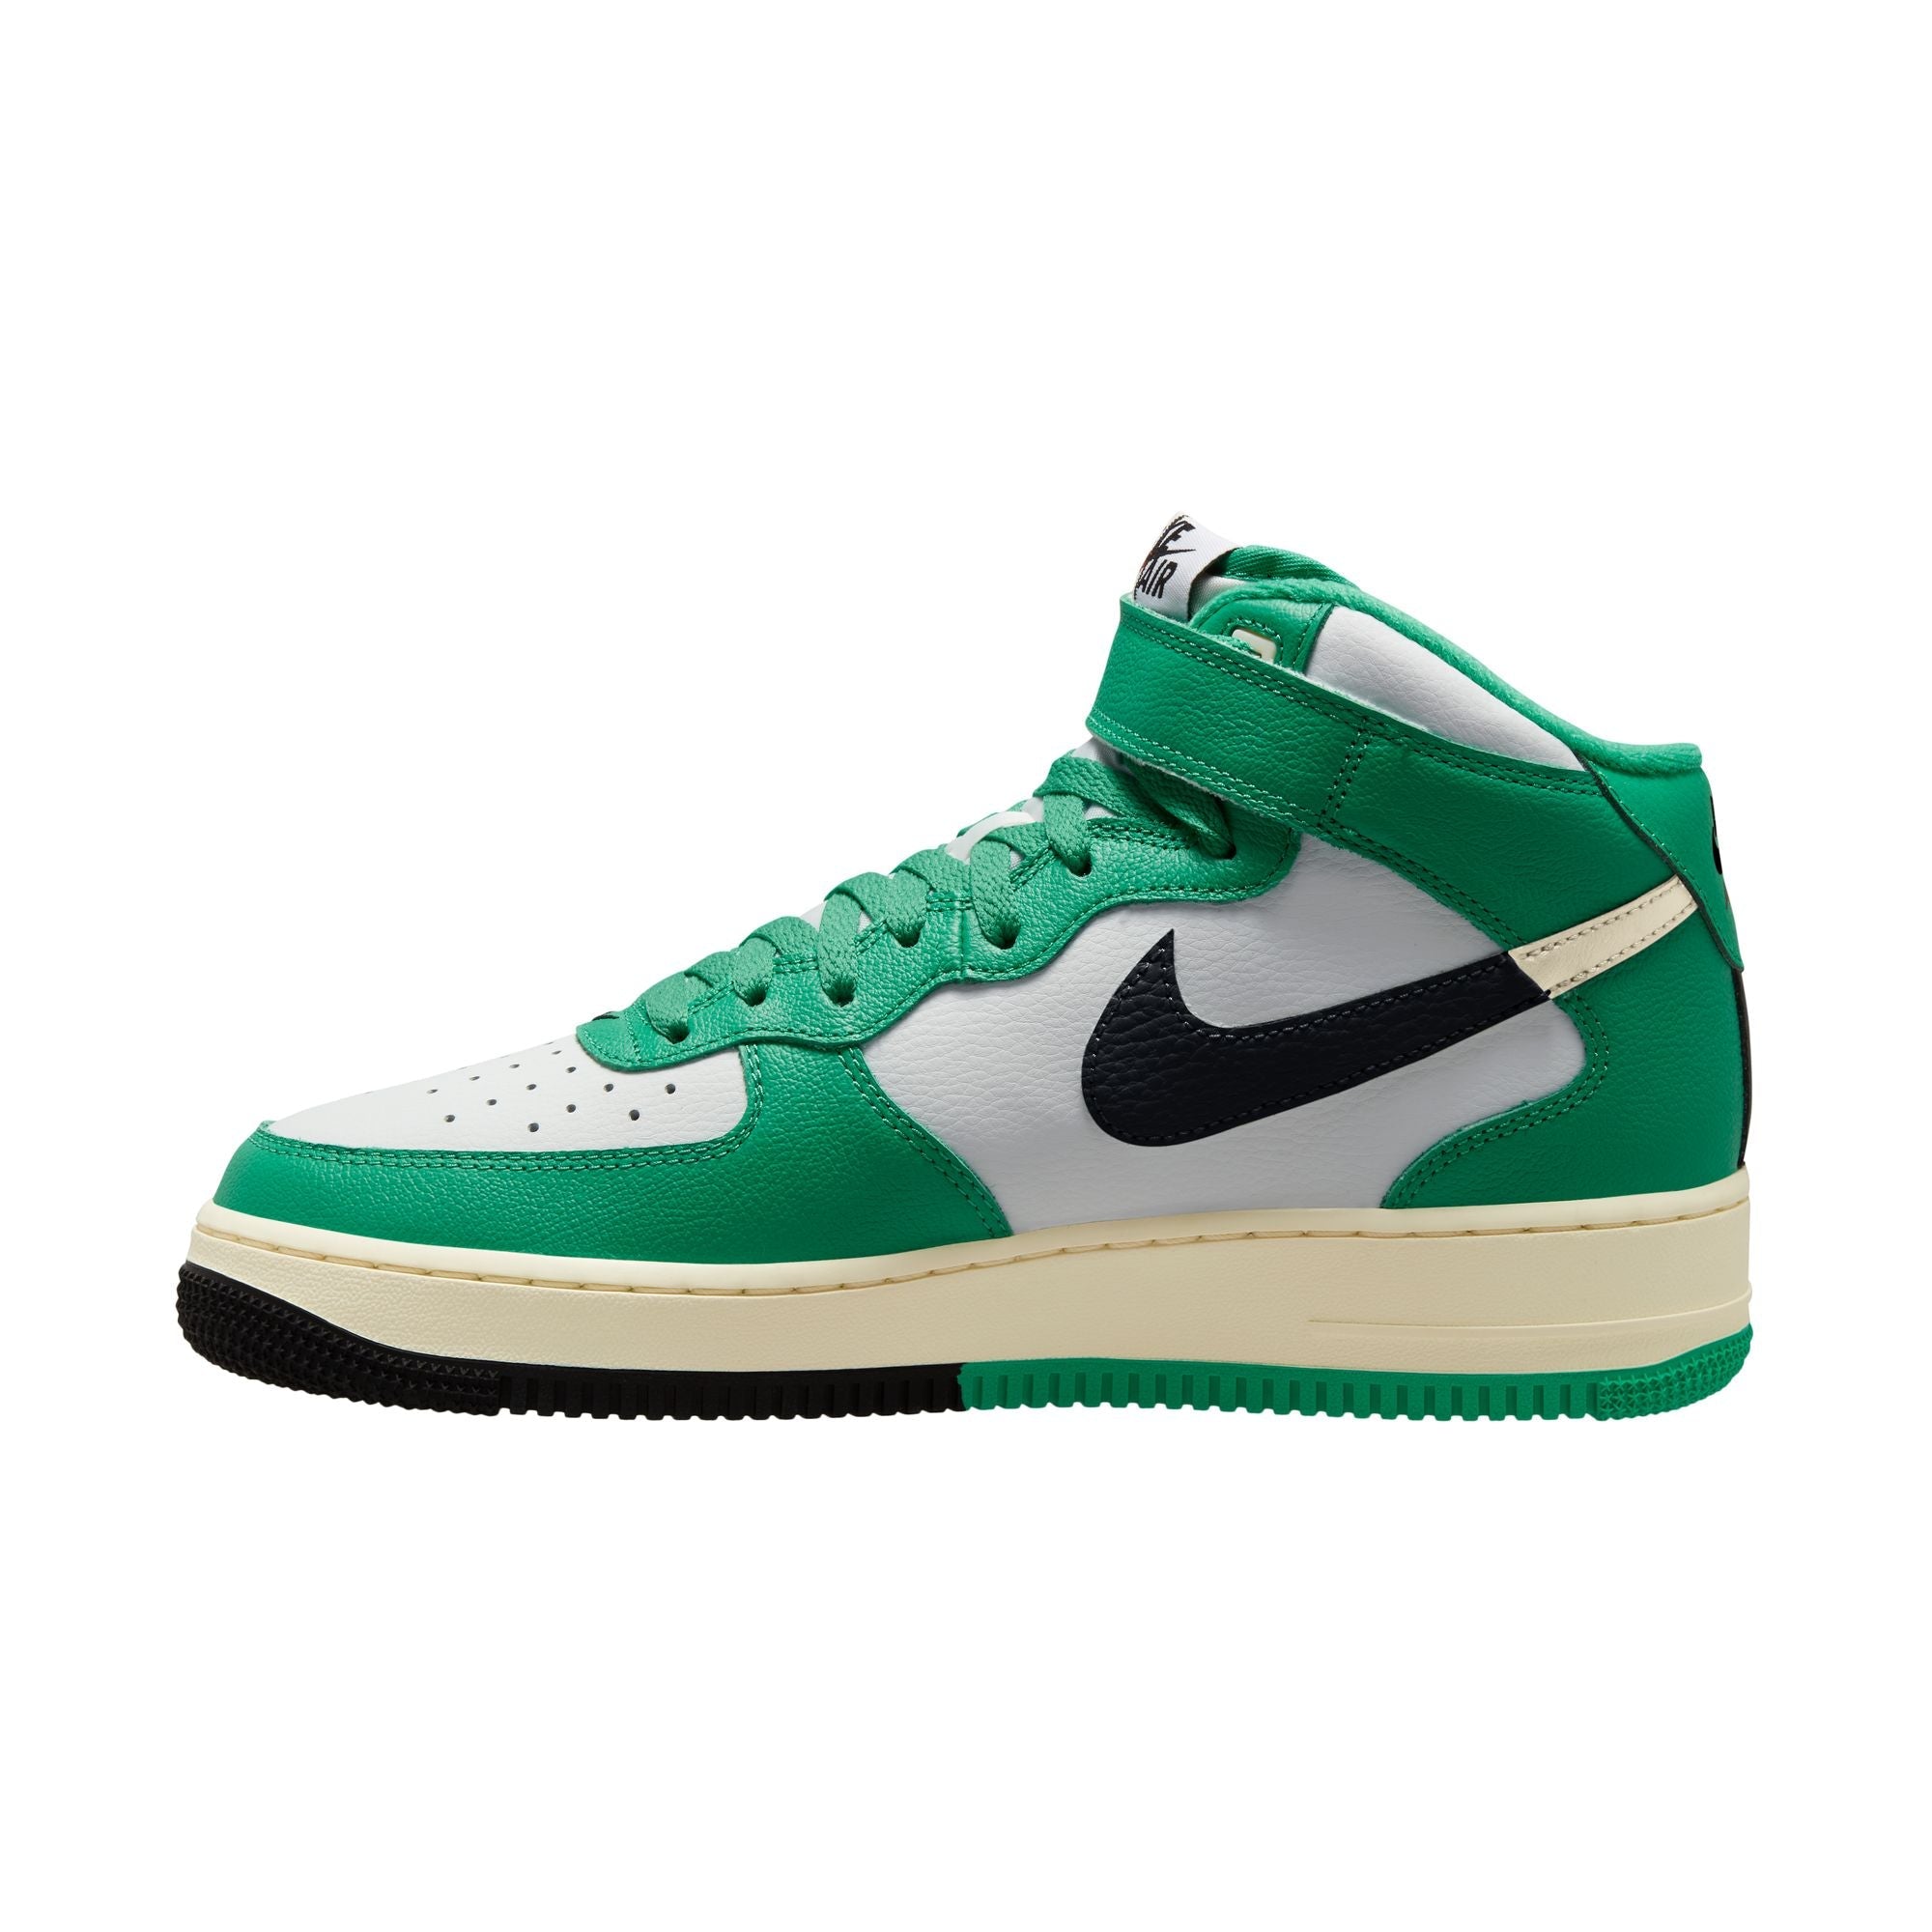 AIR FORCE 1 MID '07 LV8 SUMMIT WHITE/BLACK-STADIUM GREEN – Park Outlet Ph